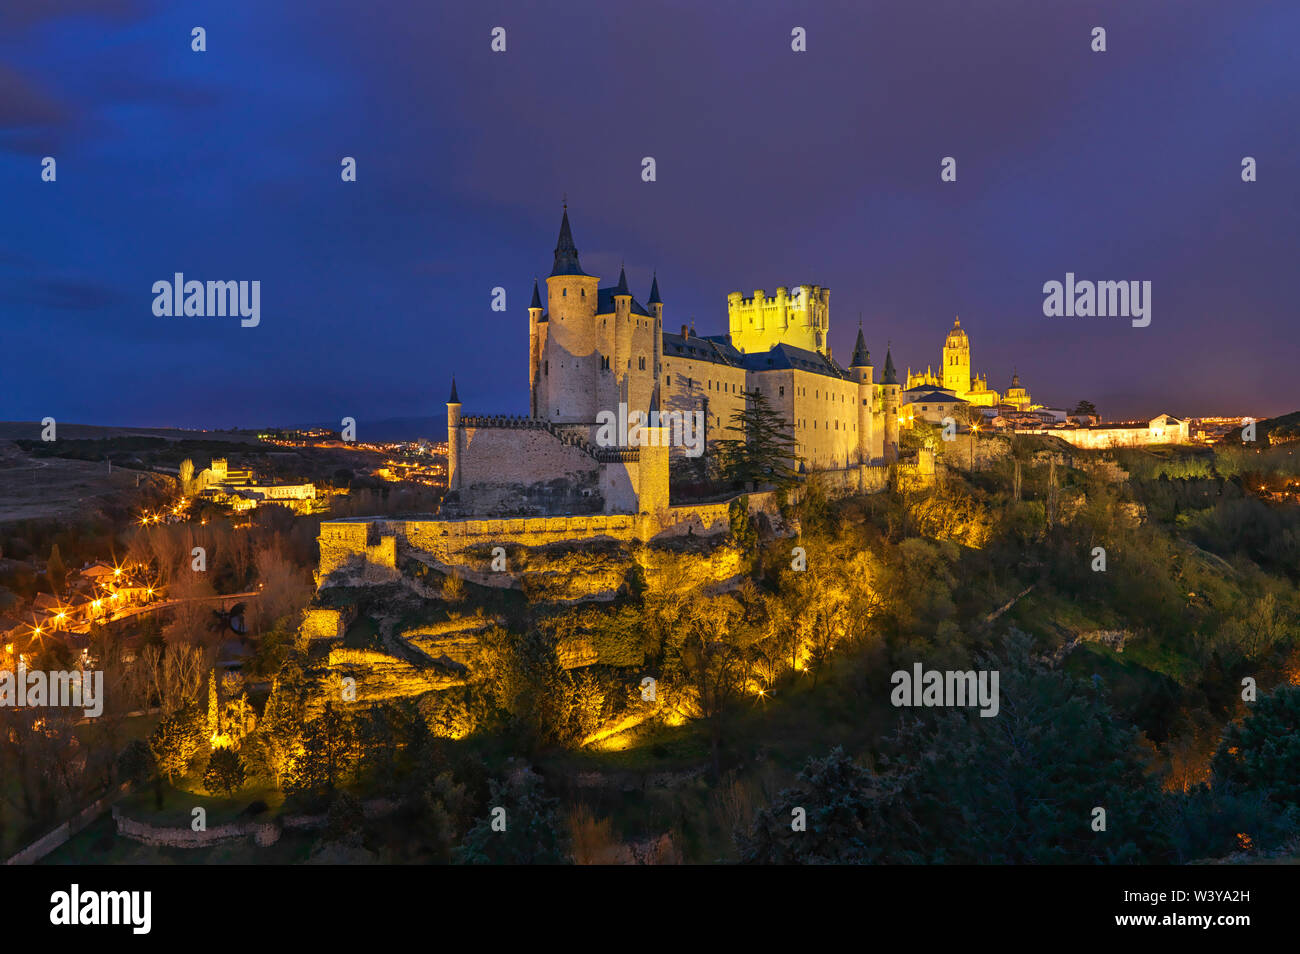 Spain, Castile and Leon, Segovia, the Alcazar and cathedral at night Stock Photo